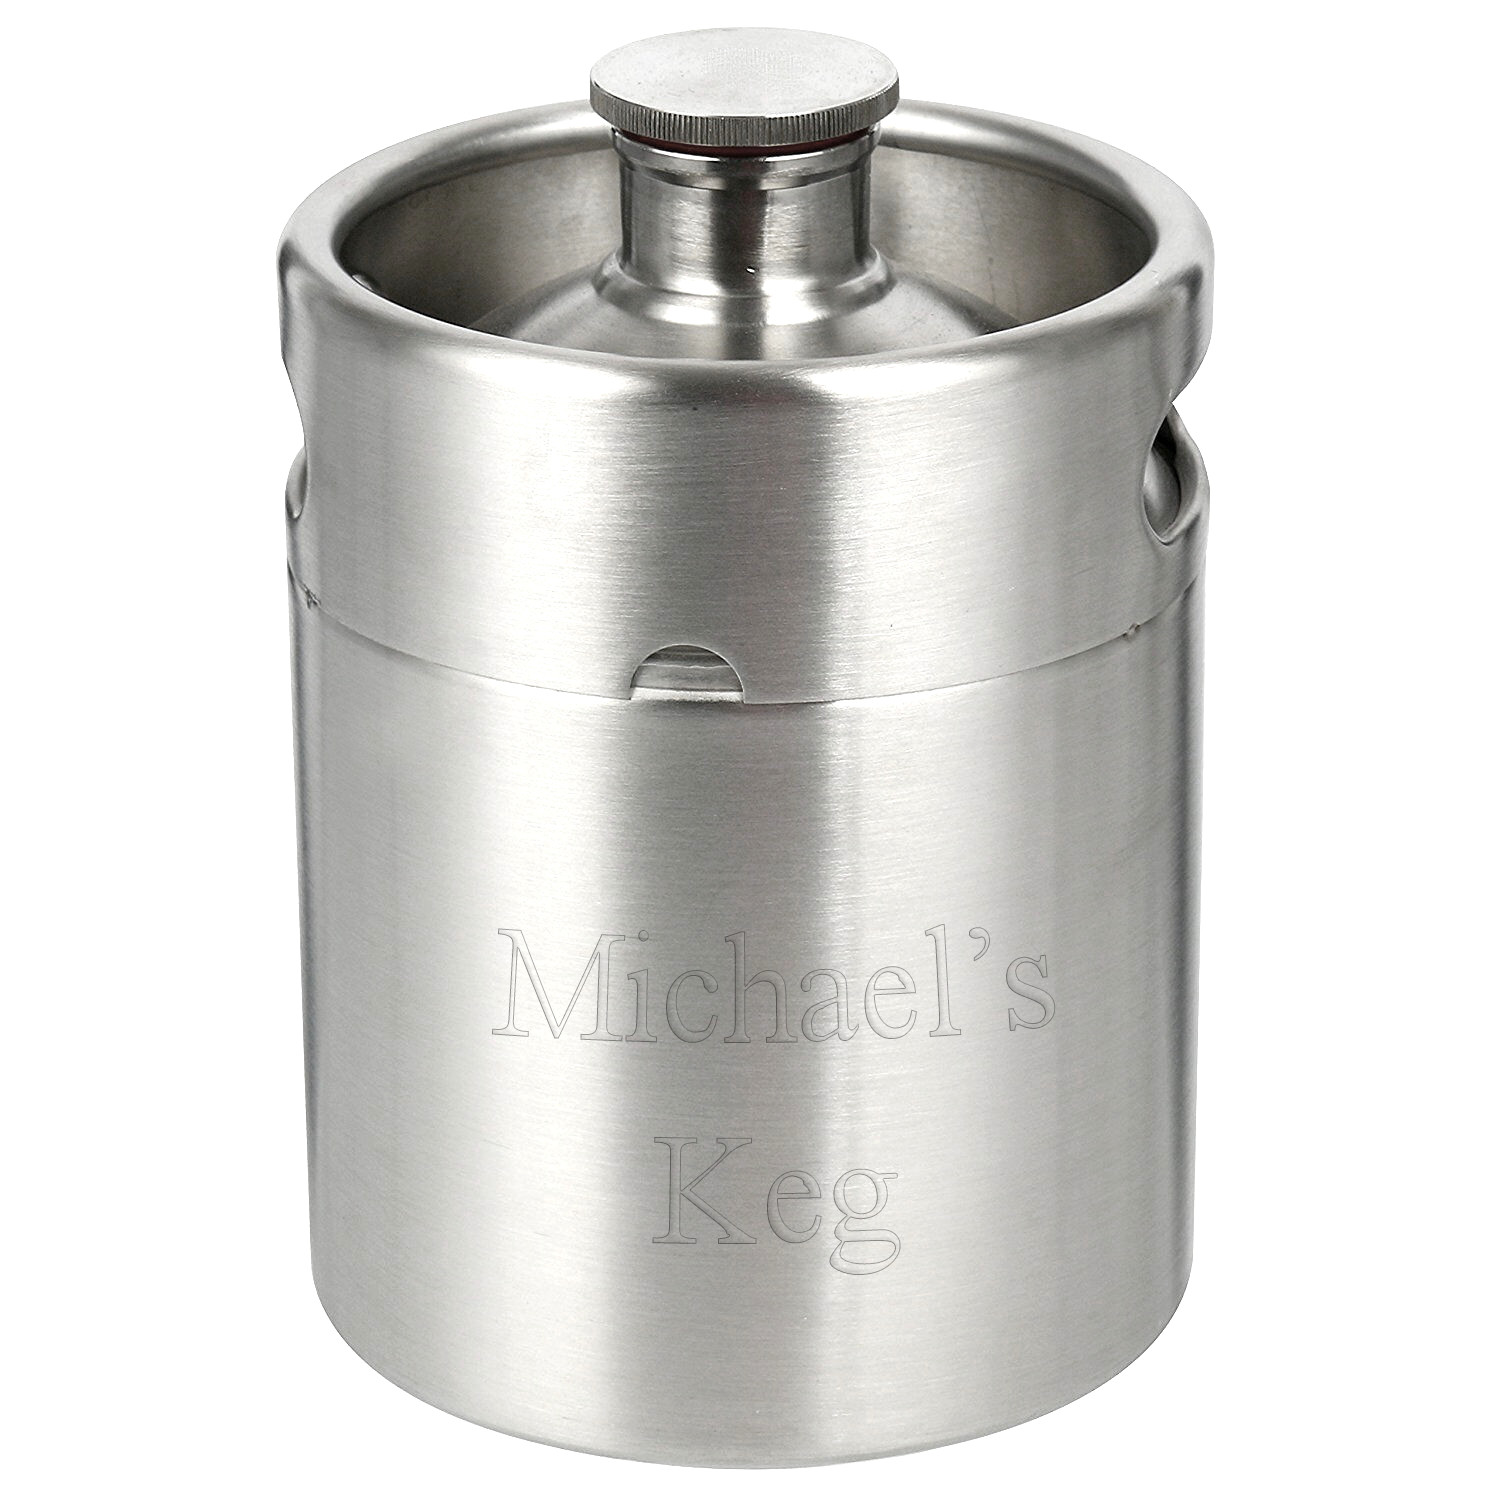 Jimfoty Mini Keg Growler 2L Mini Stainless Steel Beer Growler Barrel with Spiral Cover Lid Practical Home Hotel Supplies 